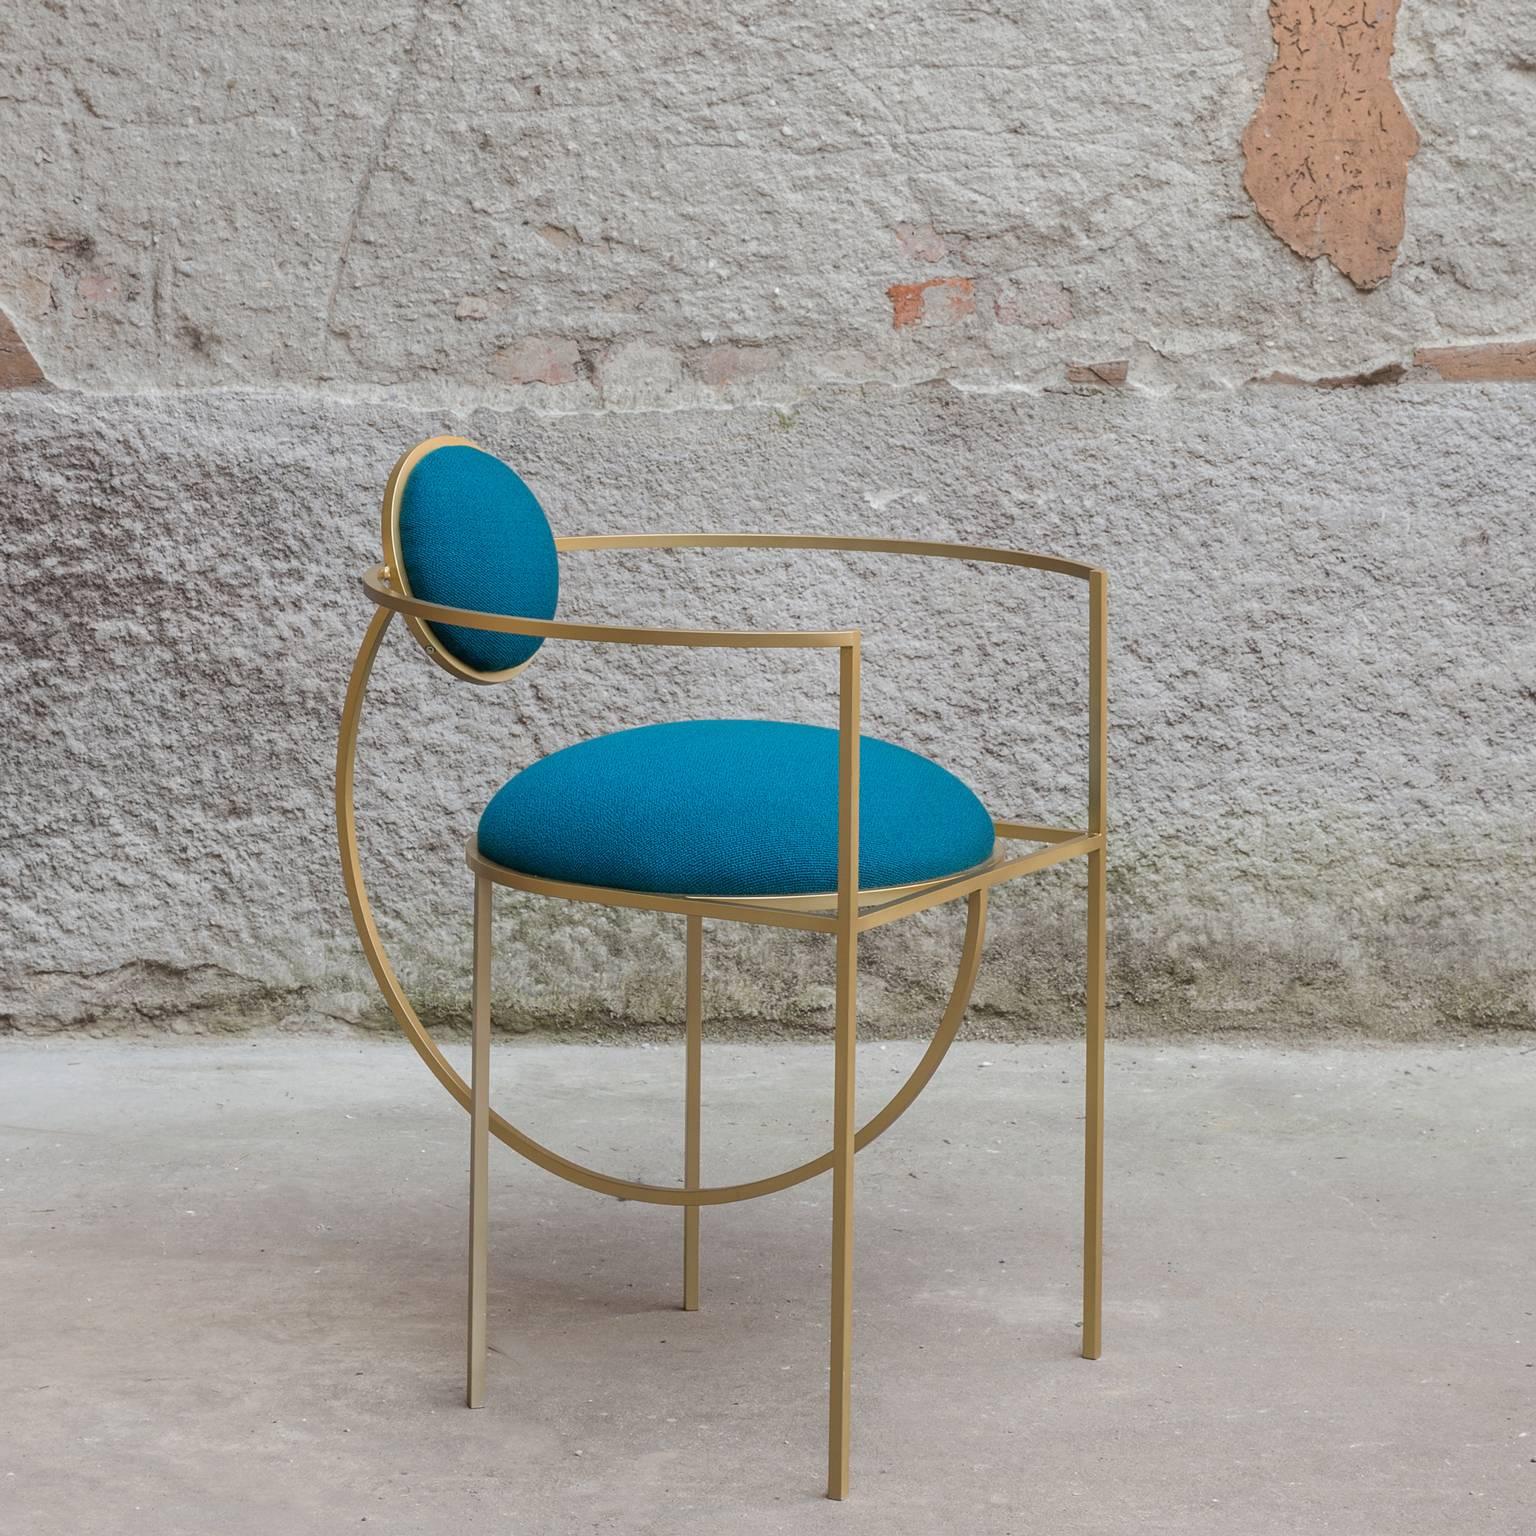 Metalwork Lunar Chair in Blue Wool Fabric and Brushed Brass Frame, by Lara Bohinc